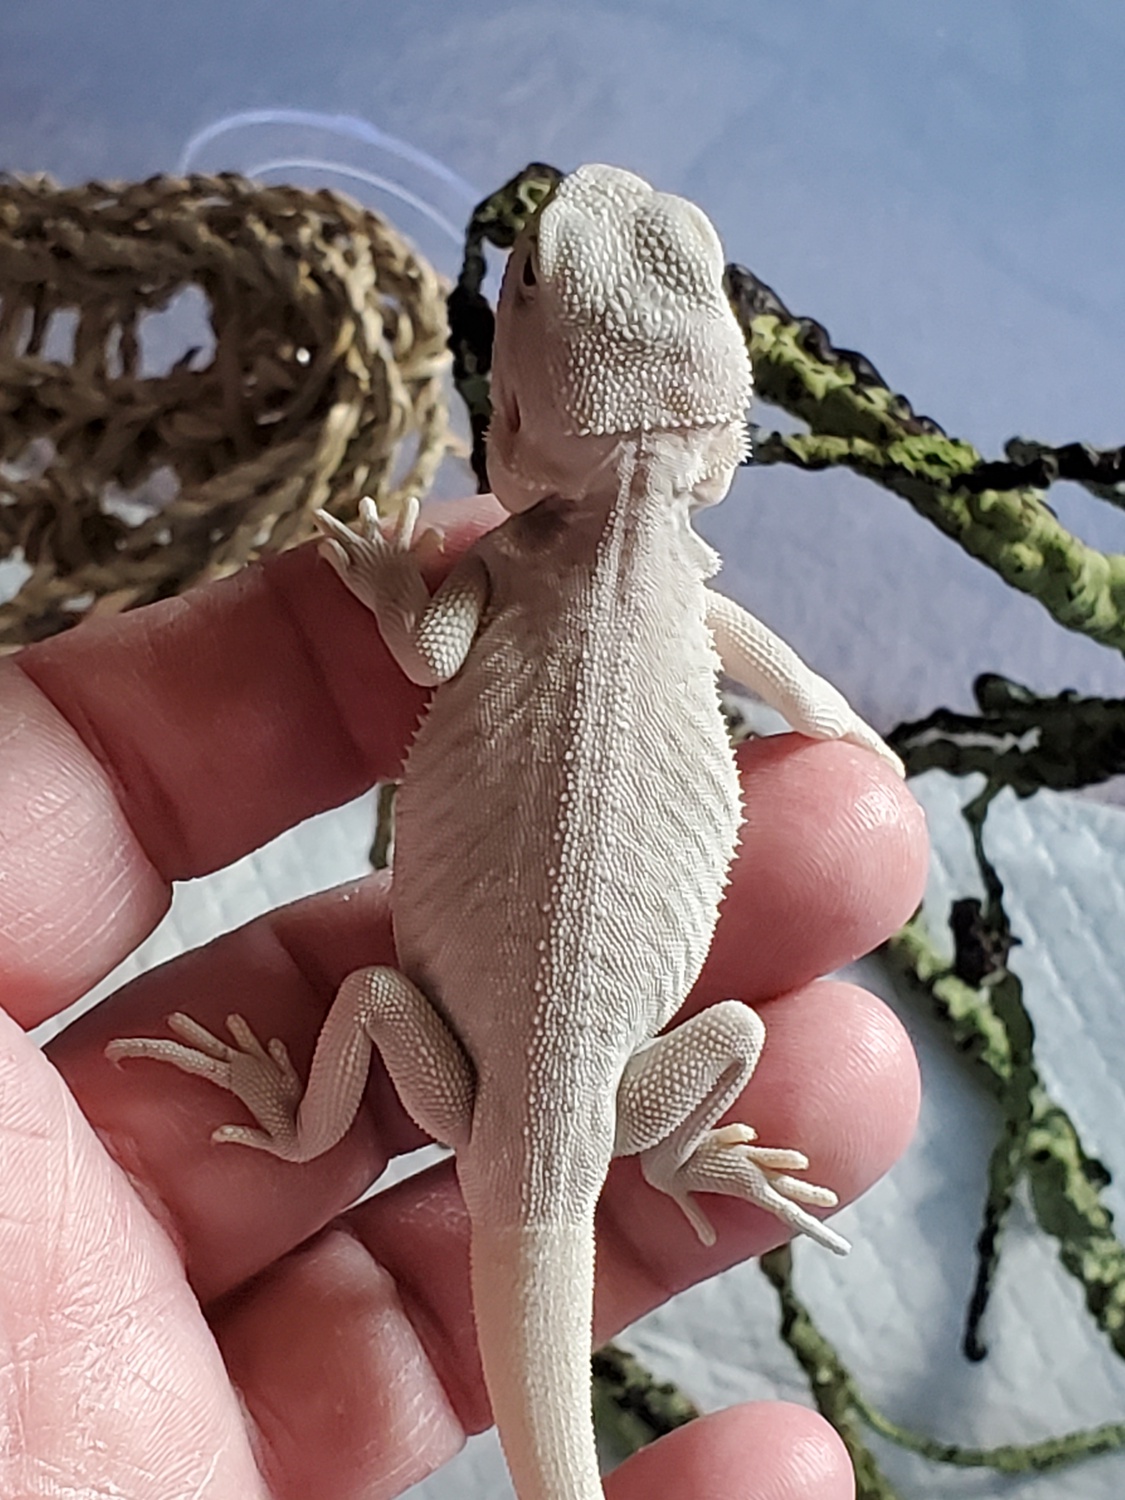 Hypo White Central Bearded Dragon by Dragon Magic